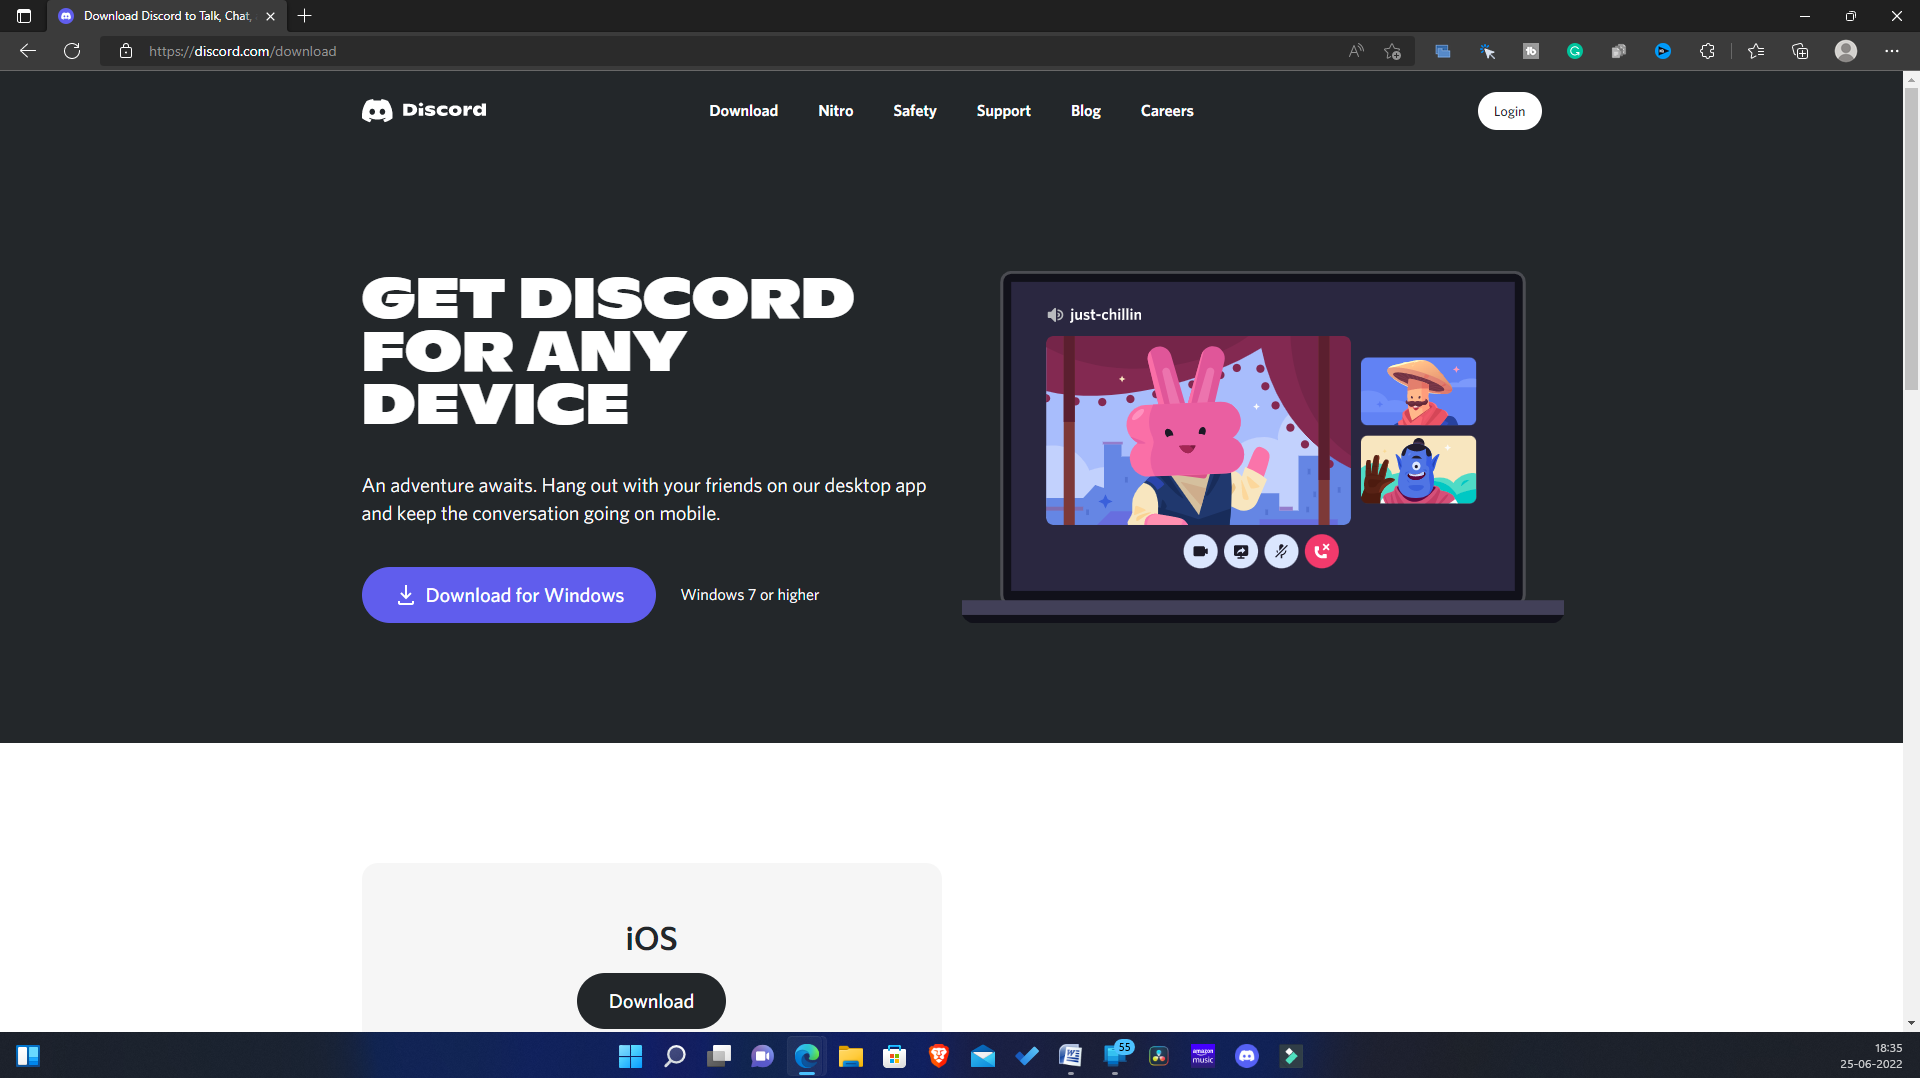 How To Stream Netflix On Discord In 2022?